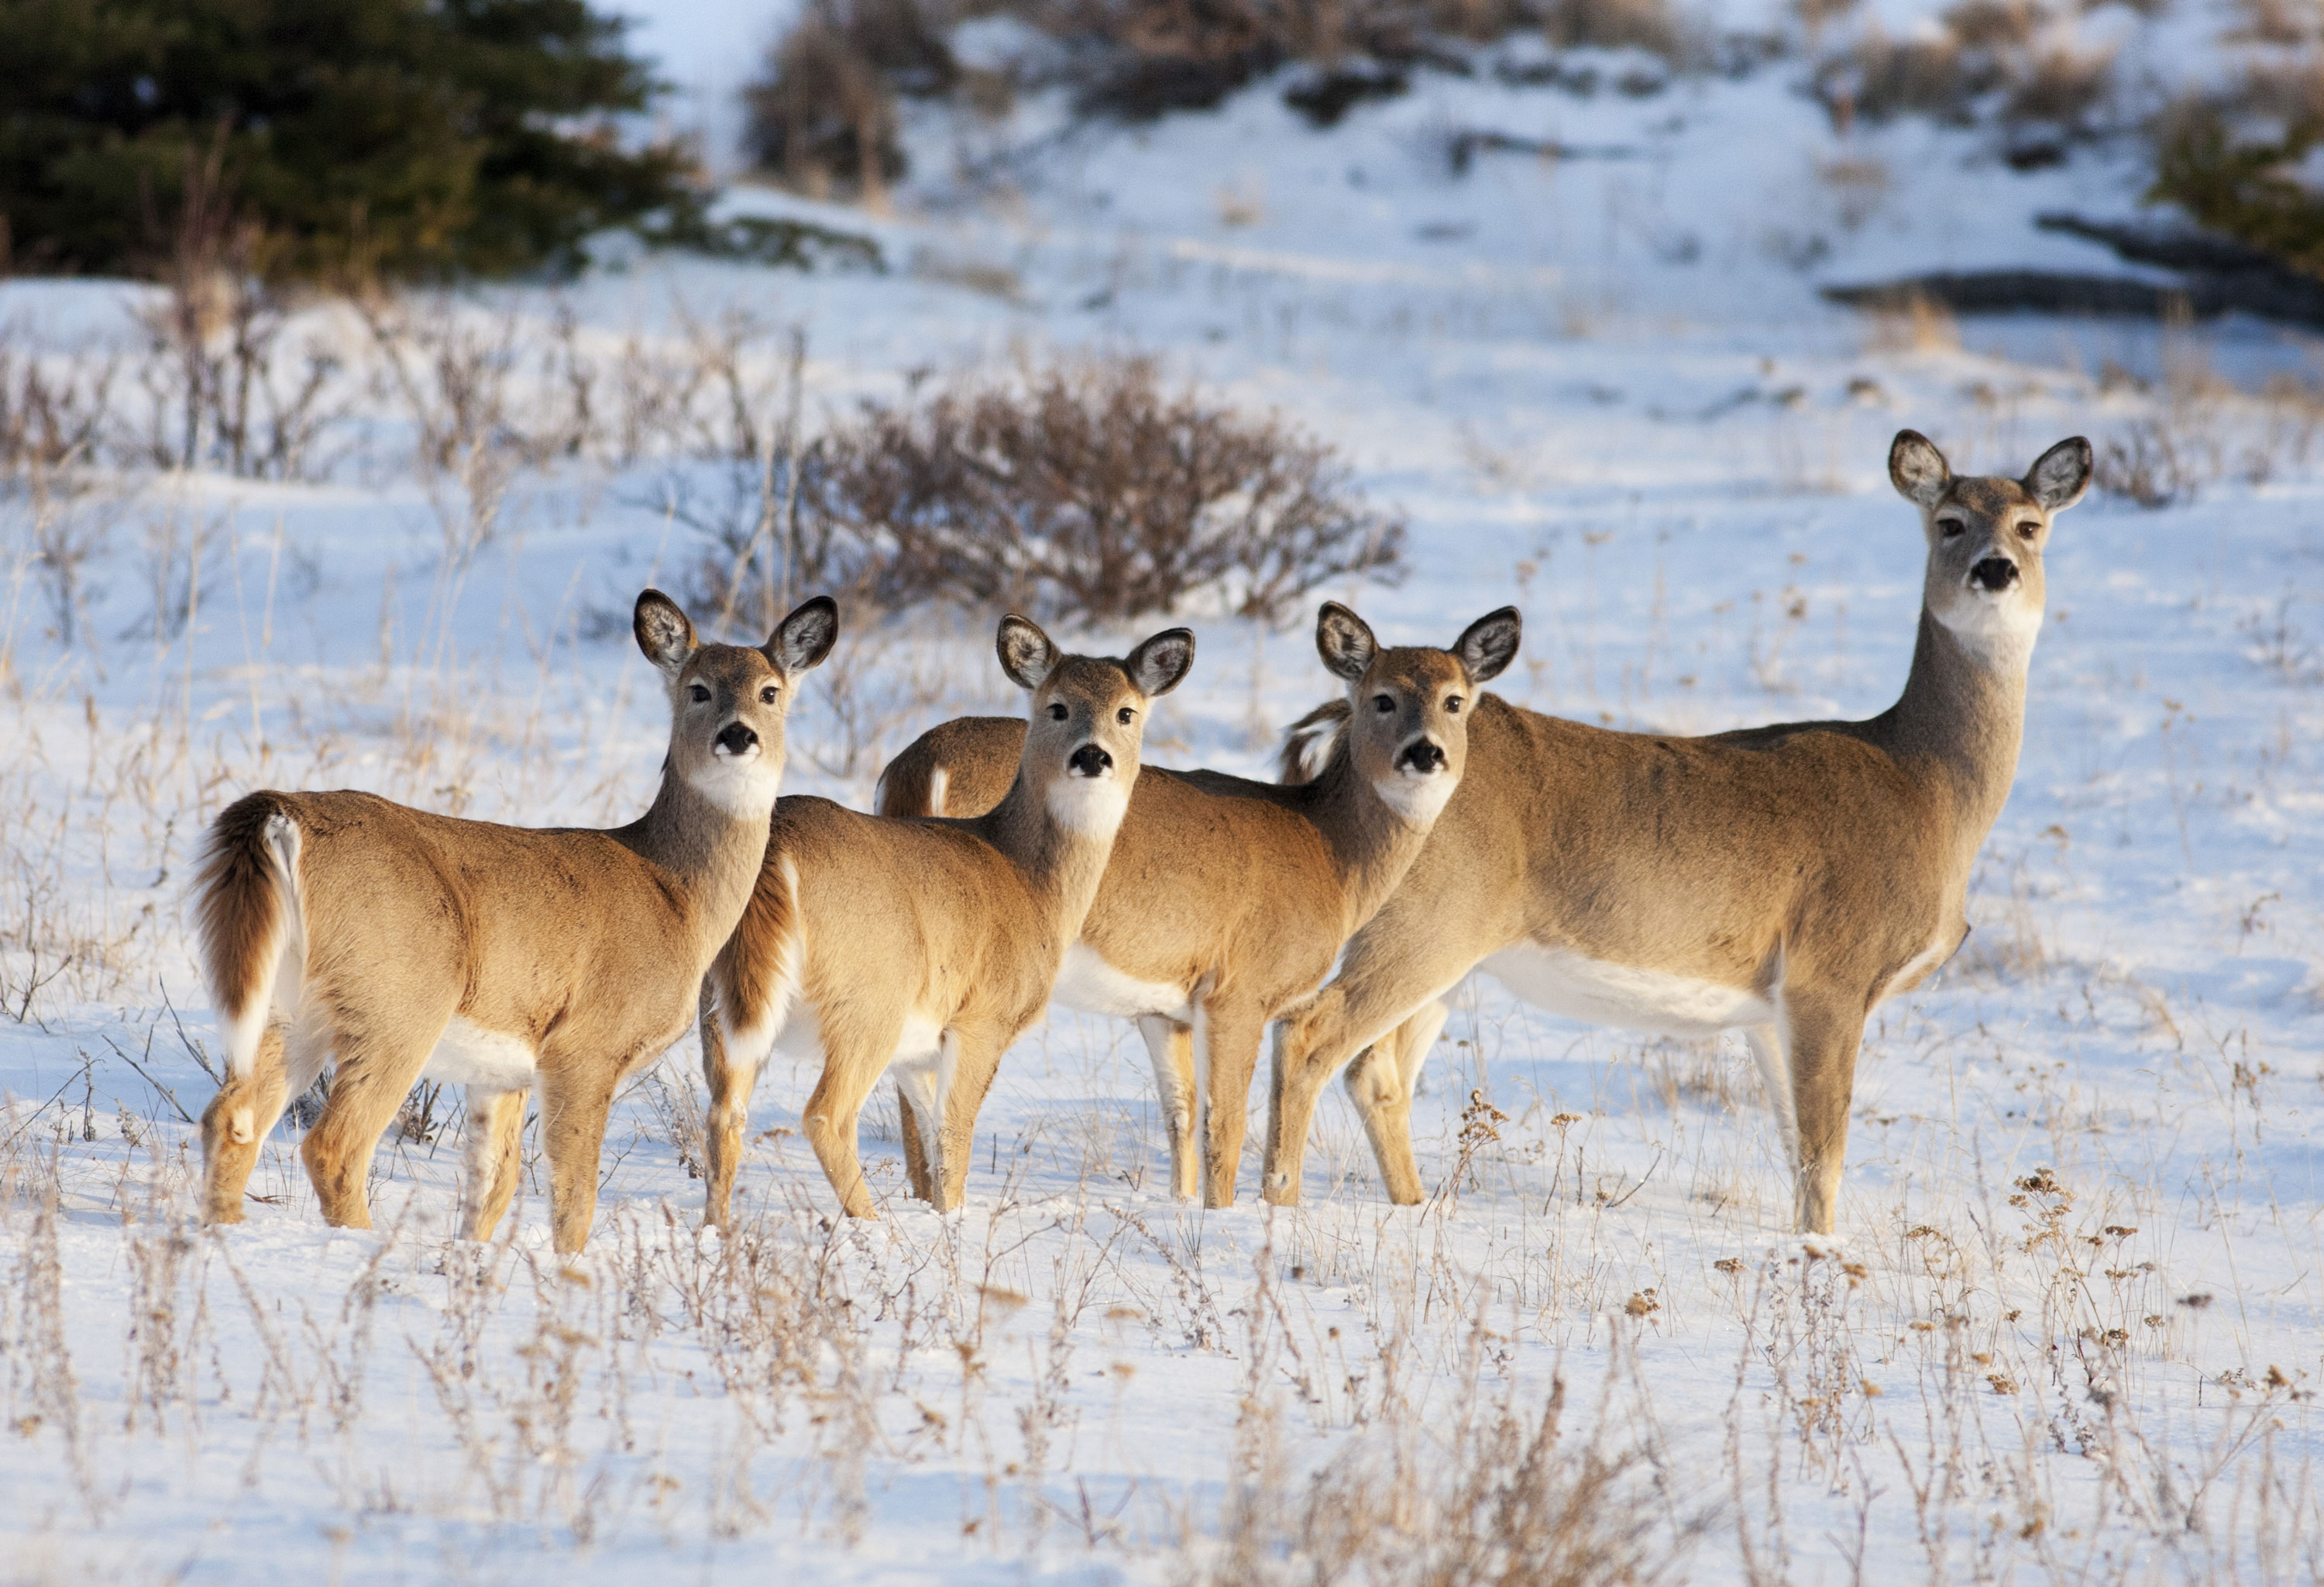 Four deer standing in a snow-covered field looking at the camera.